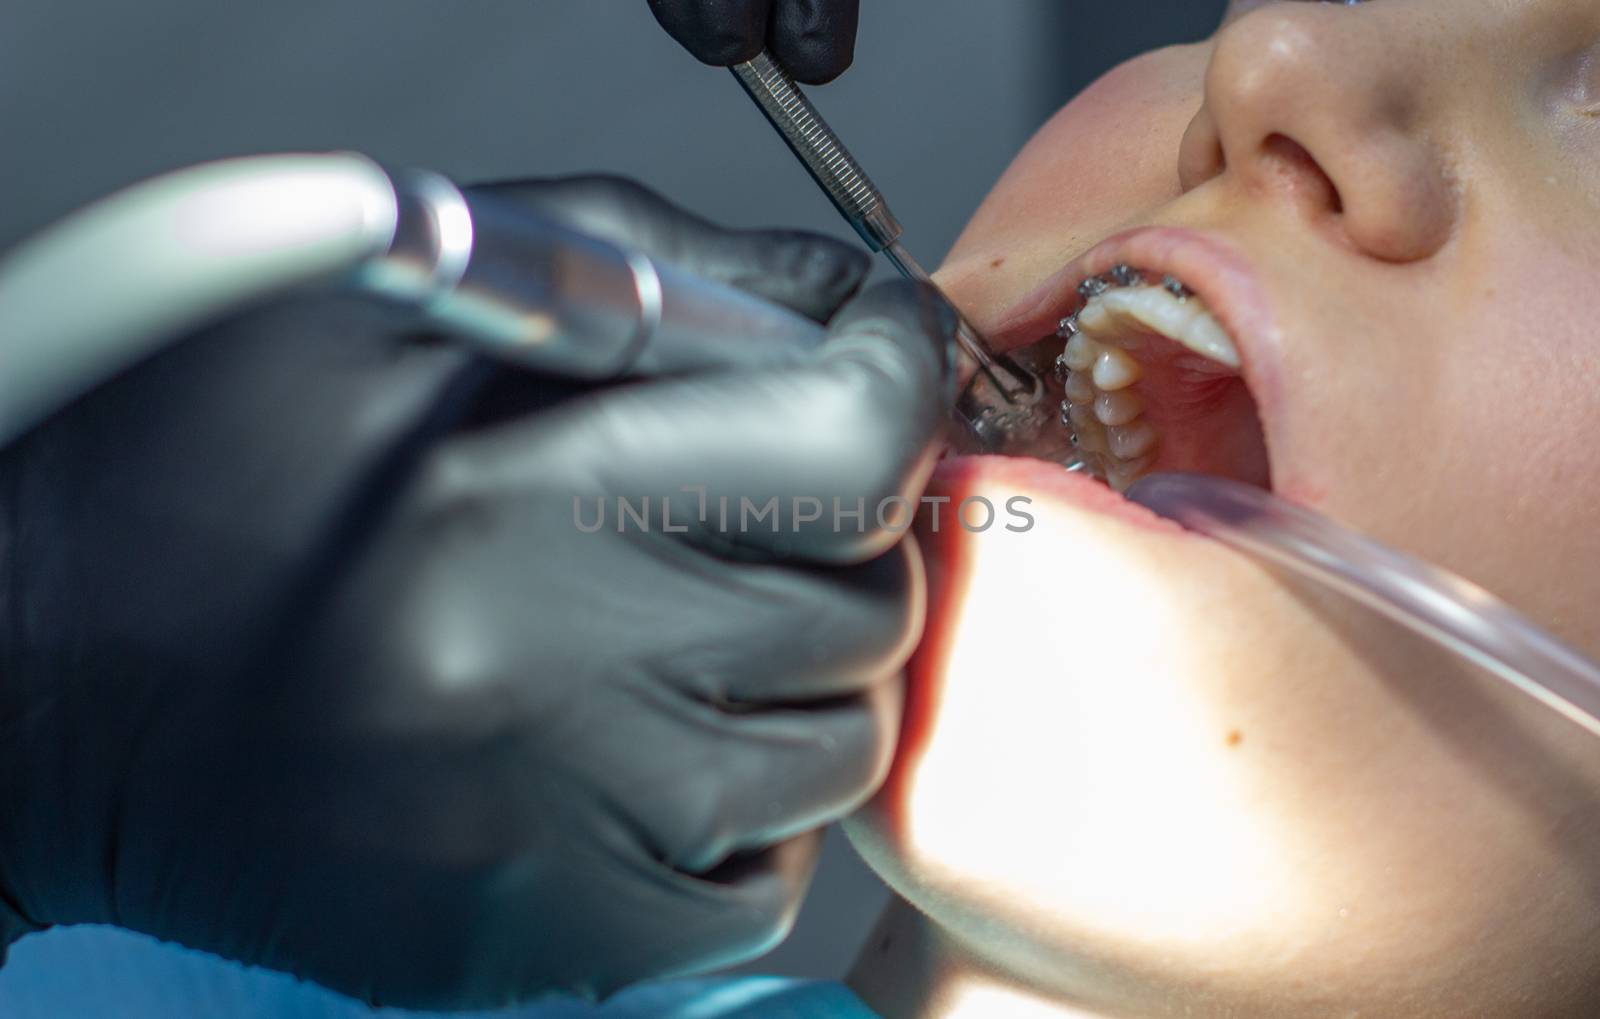 Beautiful woman in dental chair during procedure of installing braces to upper and lower teeth. orthodontist in clinic. Dentist and assistant working together, dental tools in their hands. Top view.